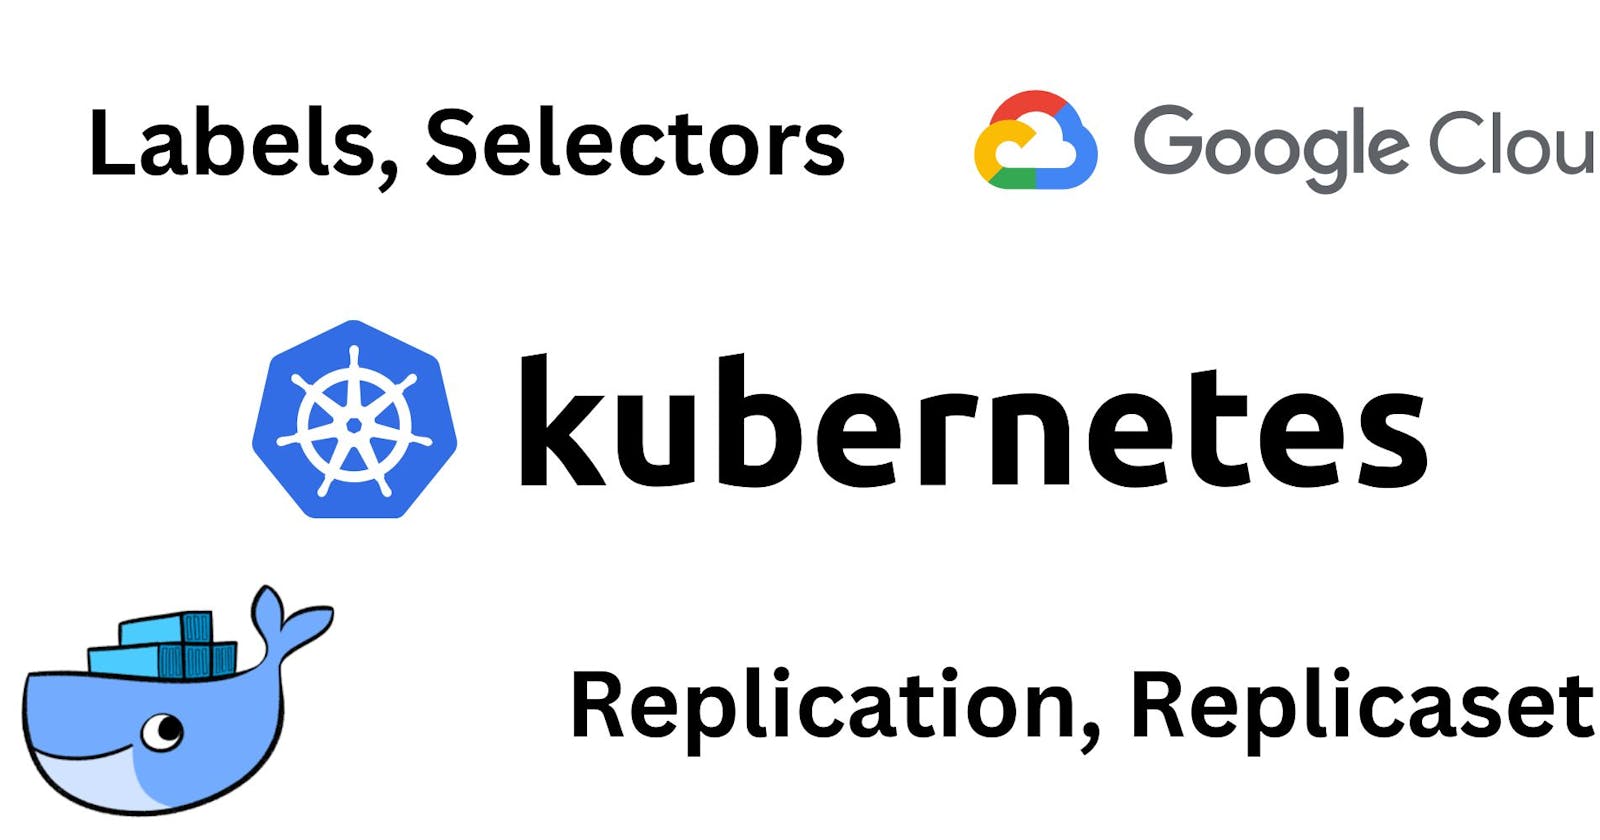 Labels, Selectors, Replication, and Replicaset in Kubernetes